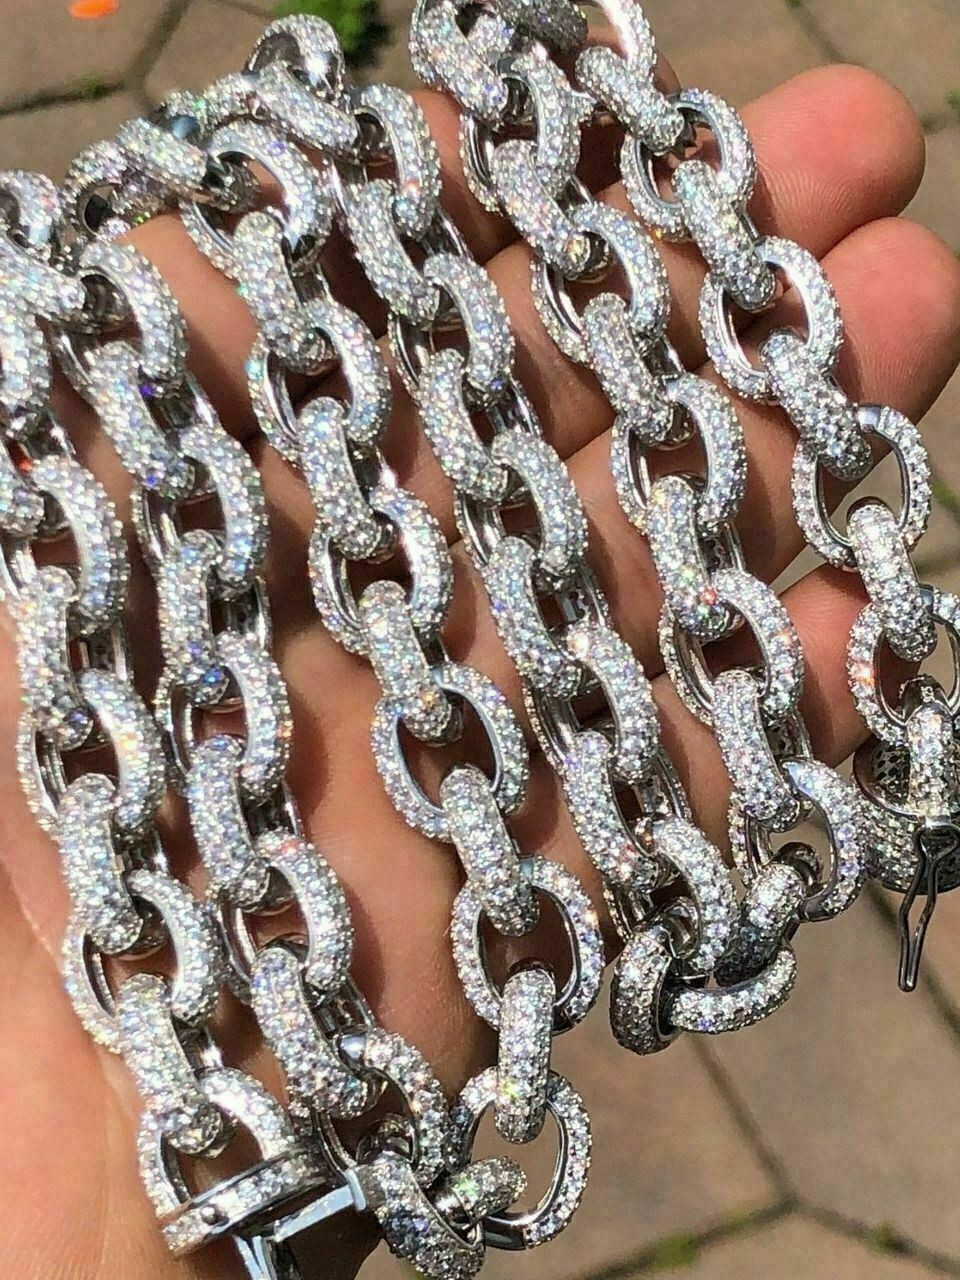 Sterling Silver Chain-3.2mm Diamond Cut Rolo Chain - Unifinished Bulk Chain  (sold per foot).